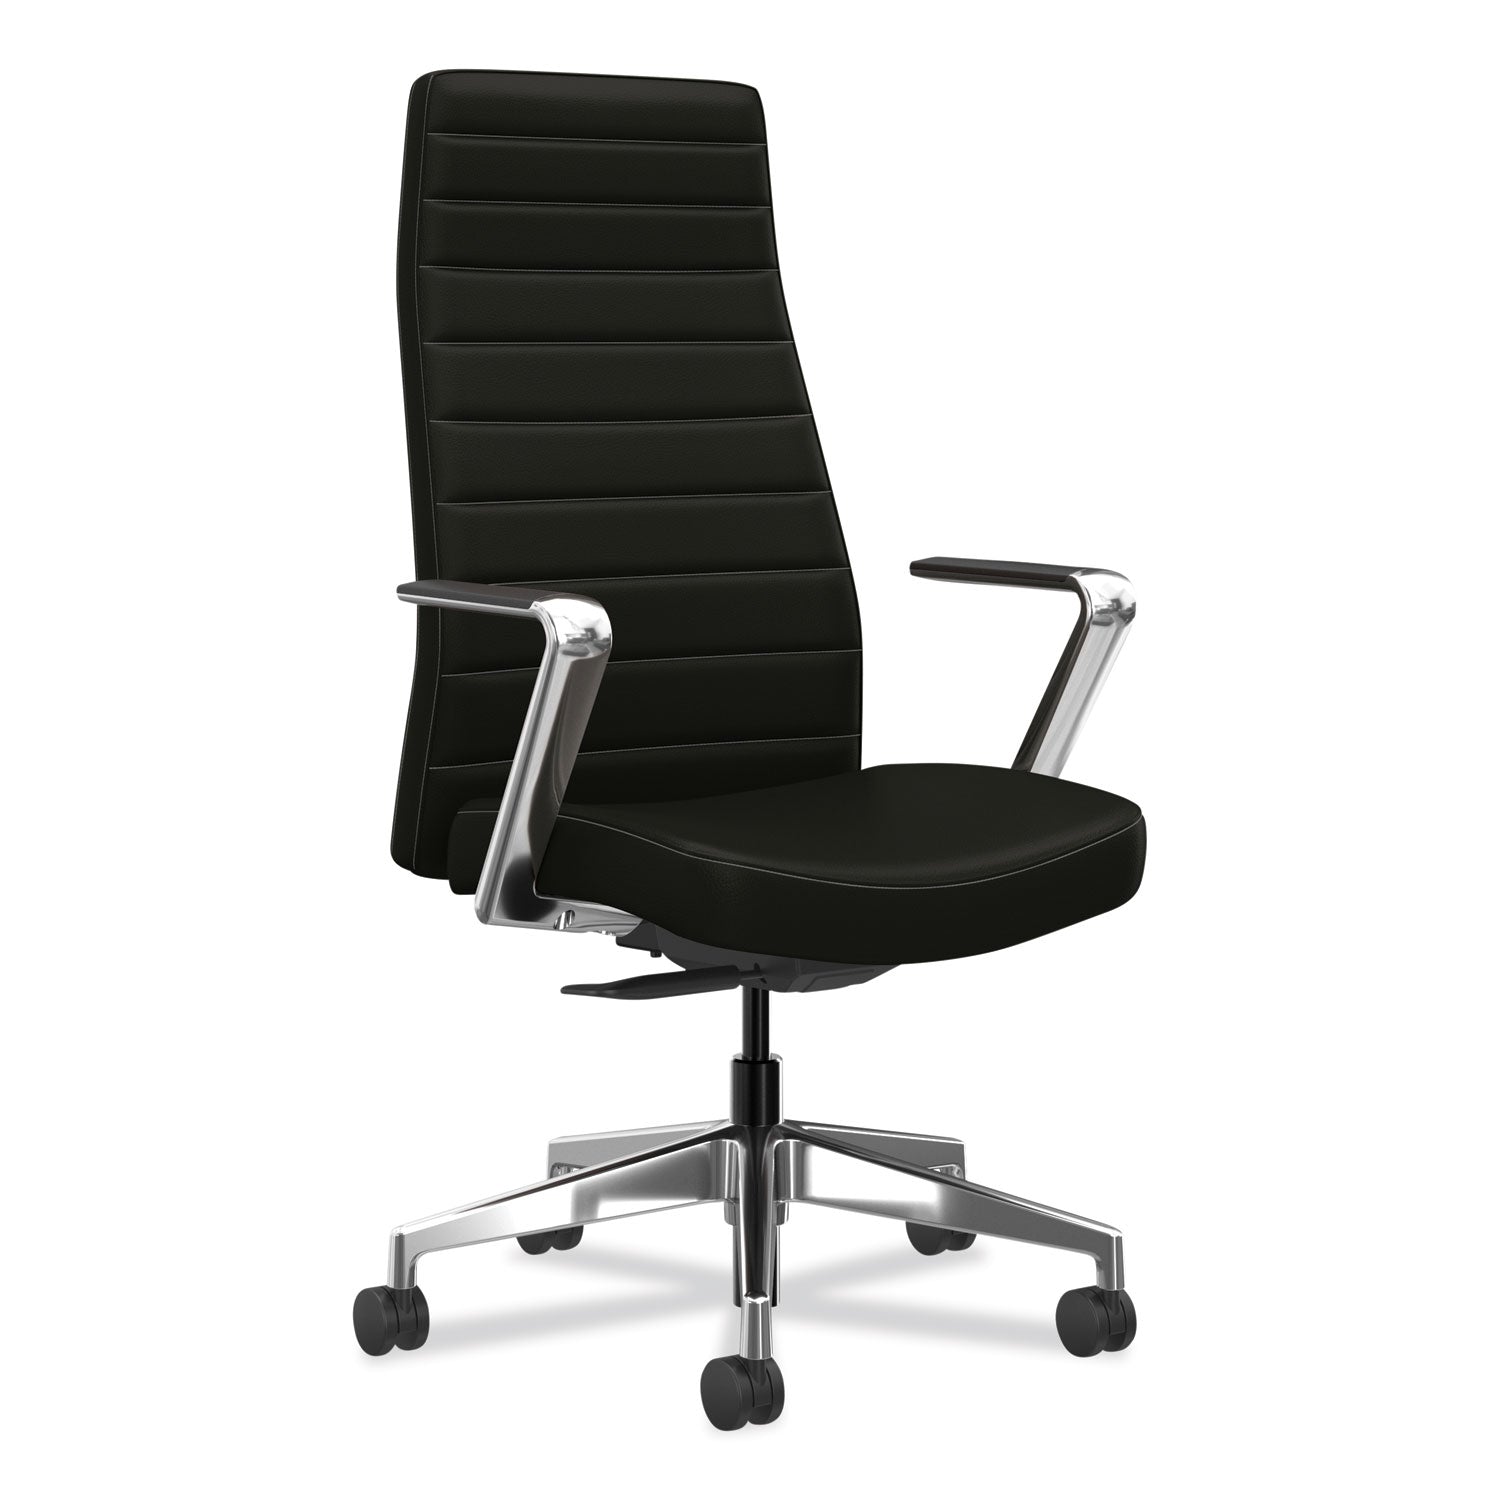 cofi-executive-high-back-chair-supports-up-to-300-lb-155-to-205-seat-height-black-seat-back-polished-aluminum-base_honceuw0pu10c9p - 3